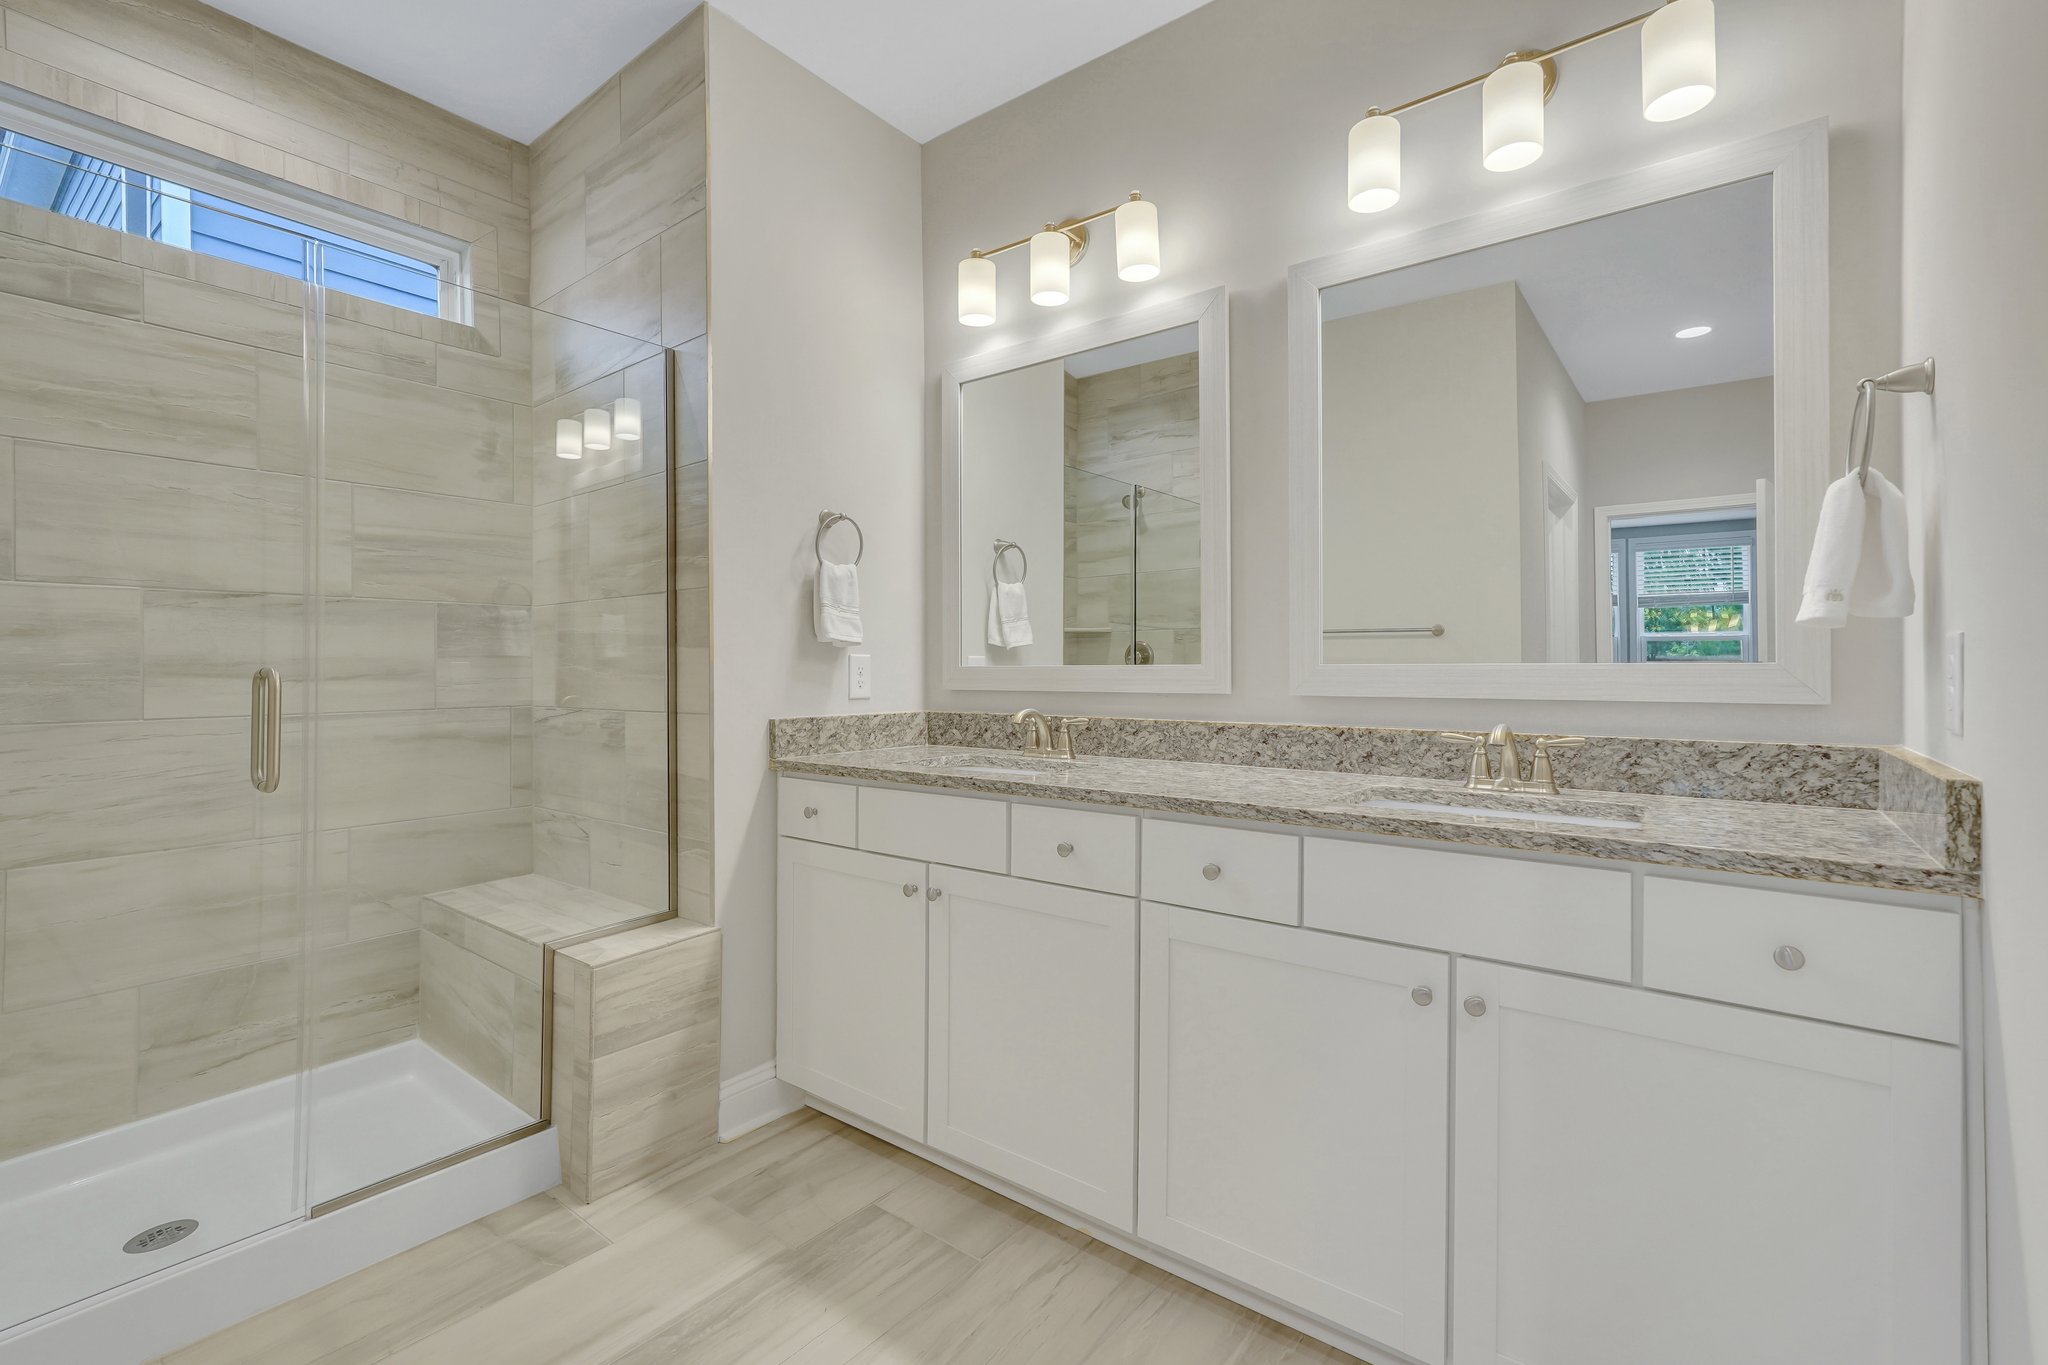 Primary Bathroom with upgraded tile, walk-in shower with bench